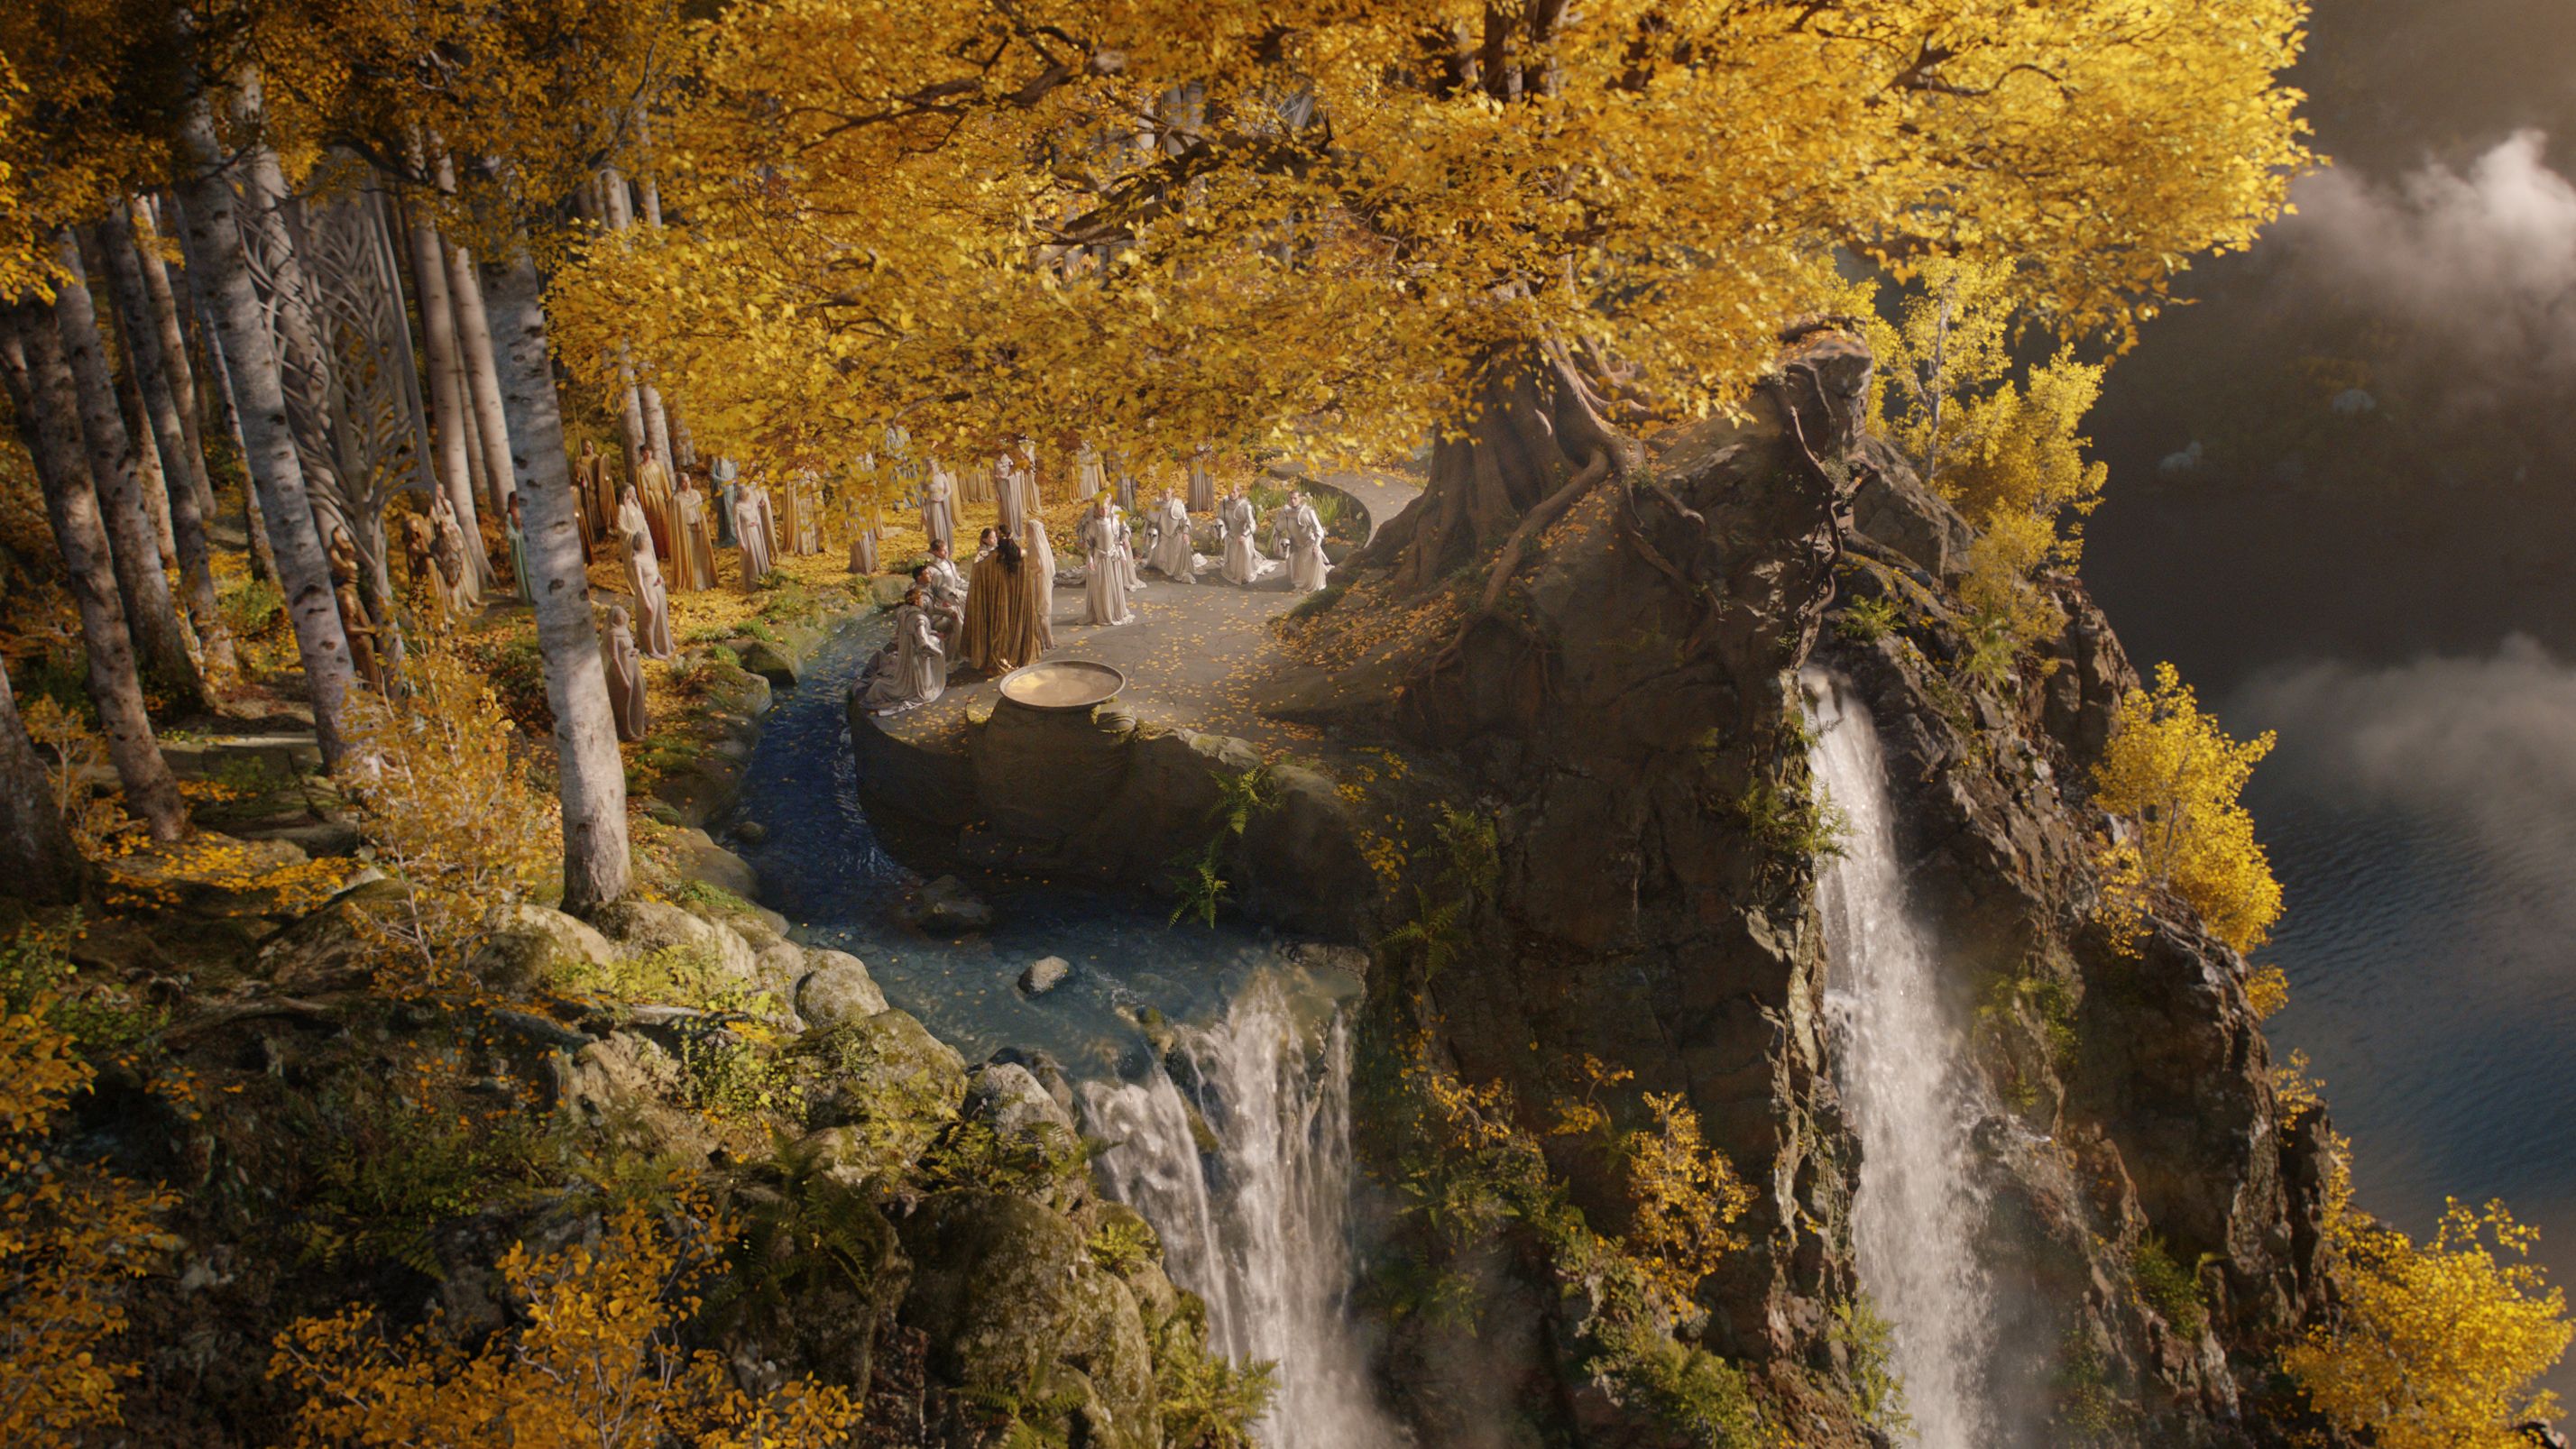 The Wertzone: LORD OF THE RINGS: THE RINGS OF POWER will drop its first  trailer on Sunday